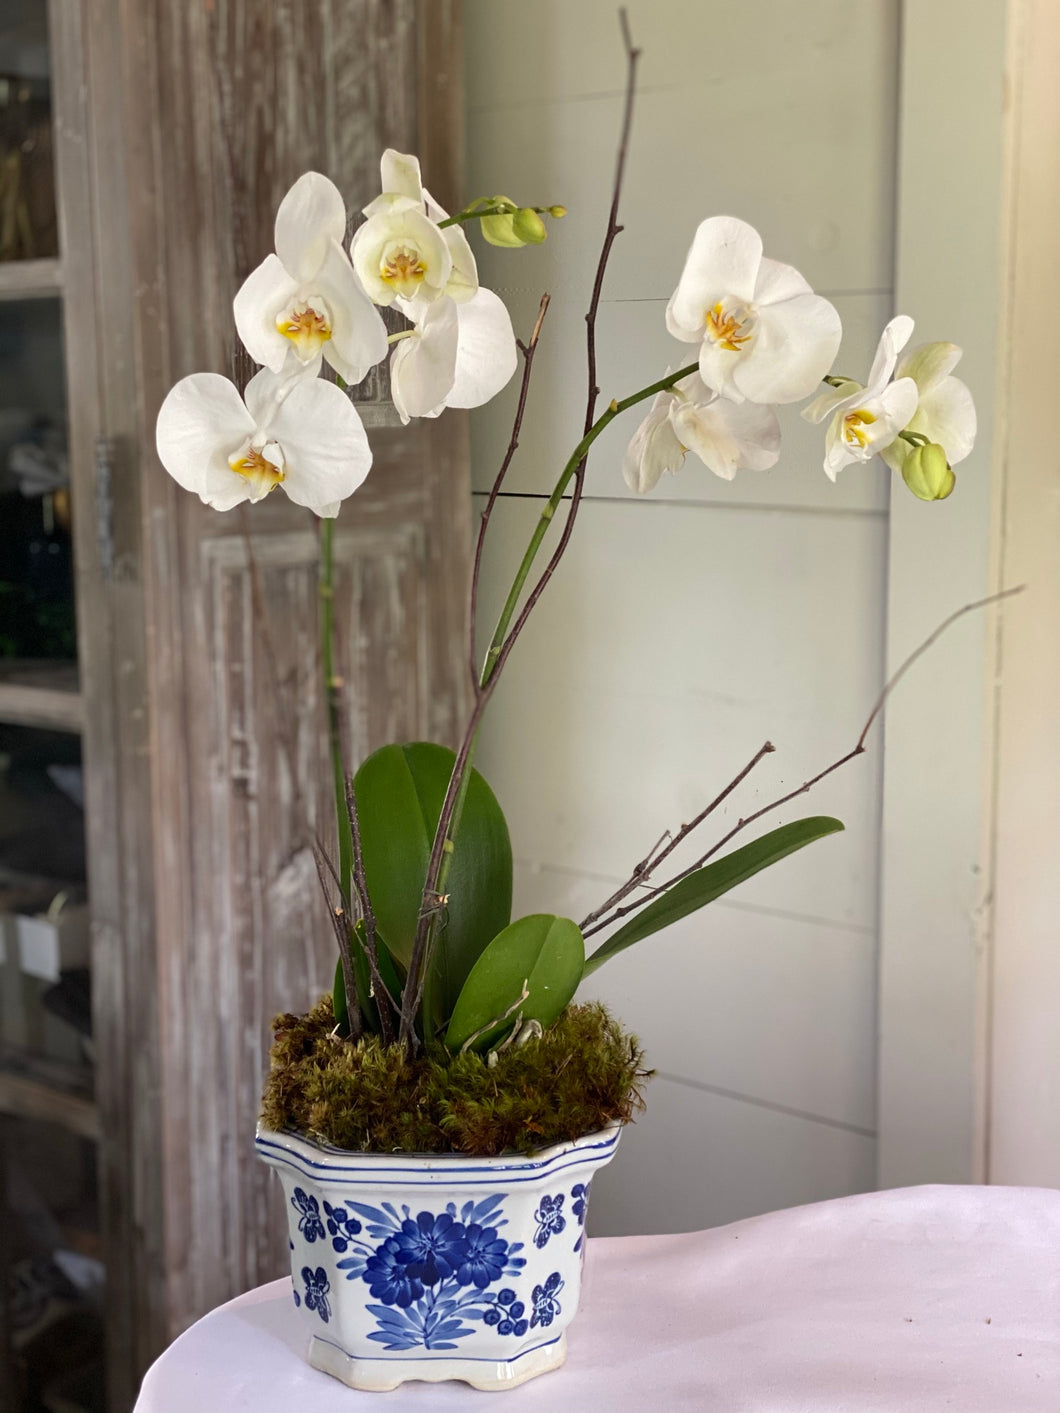 The Potted Orchid